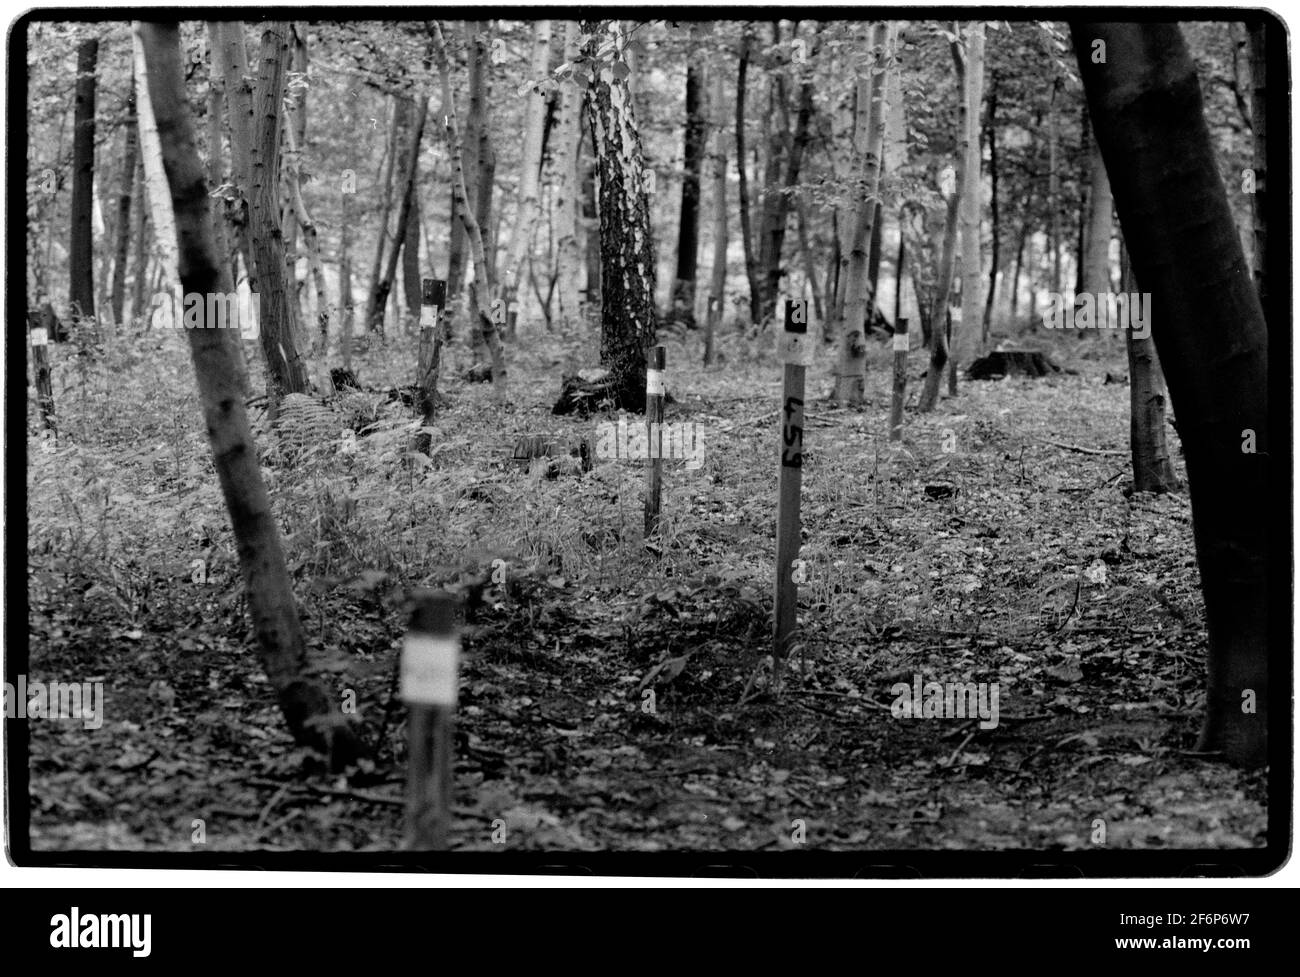 Buchenwald Concentration Camp Weimar in Thuringia Germany 1994 In late 1989 after the fall of ‘The Wall’ graves revealled the remains of former Nazis imprissoned in Soviet Special Camp Number 2. Between 1990 and 1994 these graves were marked by metal steles and when named a cross was erected. Between 1945 and February 10, 1950, the camp was administered by the Soviet Union and served as Special Camp No. 2 of the NKVD.[1] It was part of a 'special camps' network operating since 1945, formally integrated into the Gulag in 1948 Stock Photo